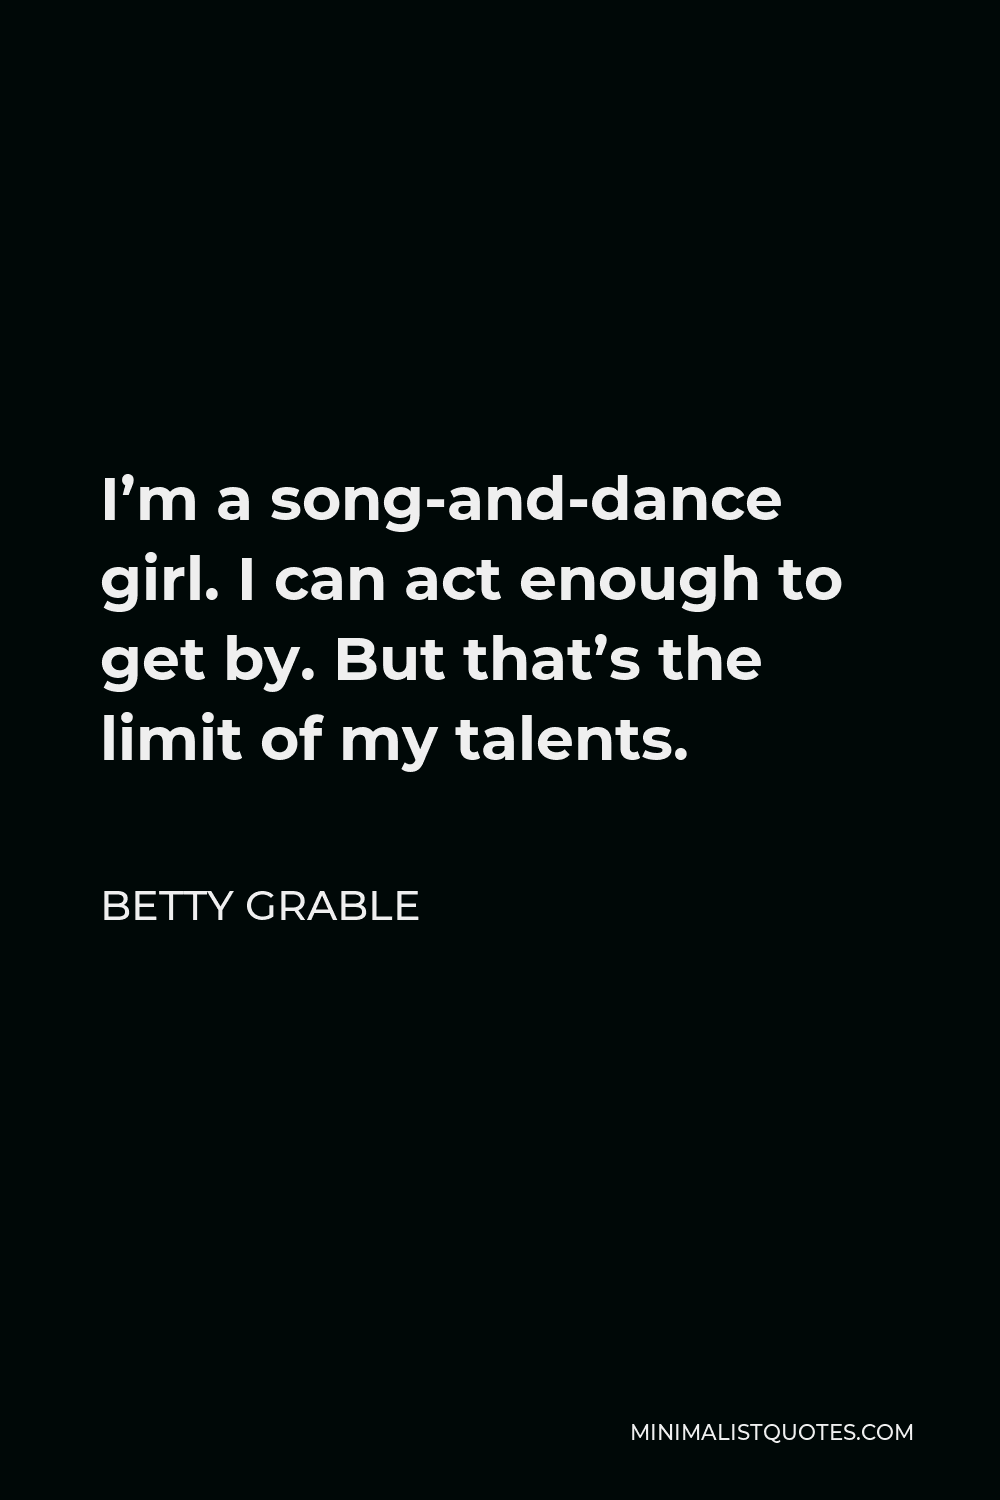 Betty Grable Quote - I’m a song-and-dance girl. I can act enough to get by. But that’s the limit of my talents.